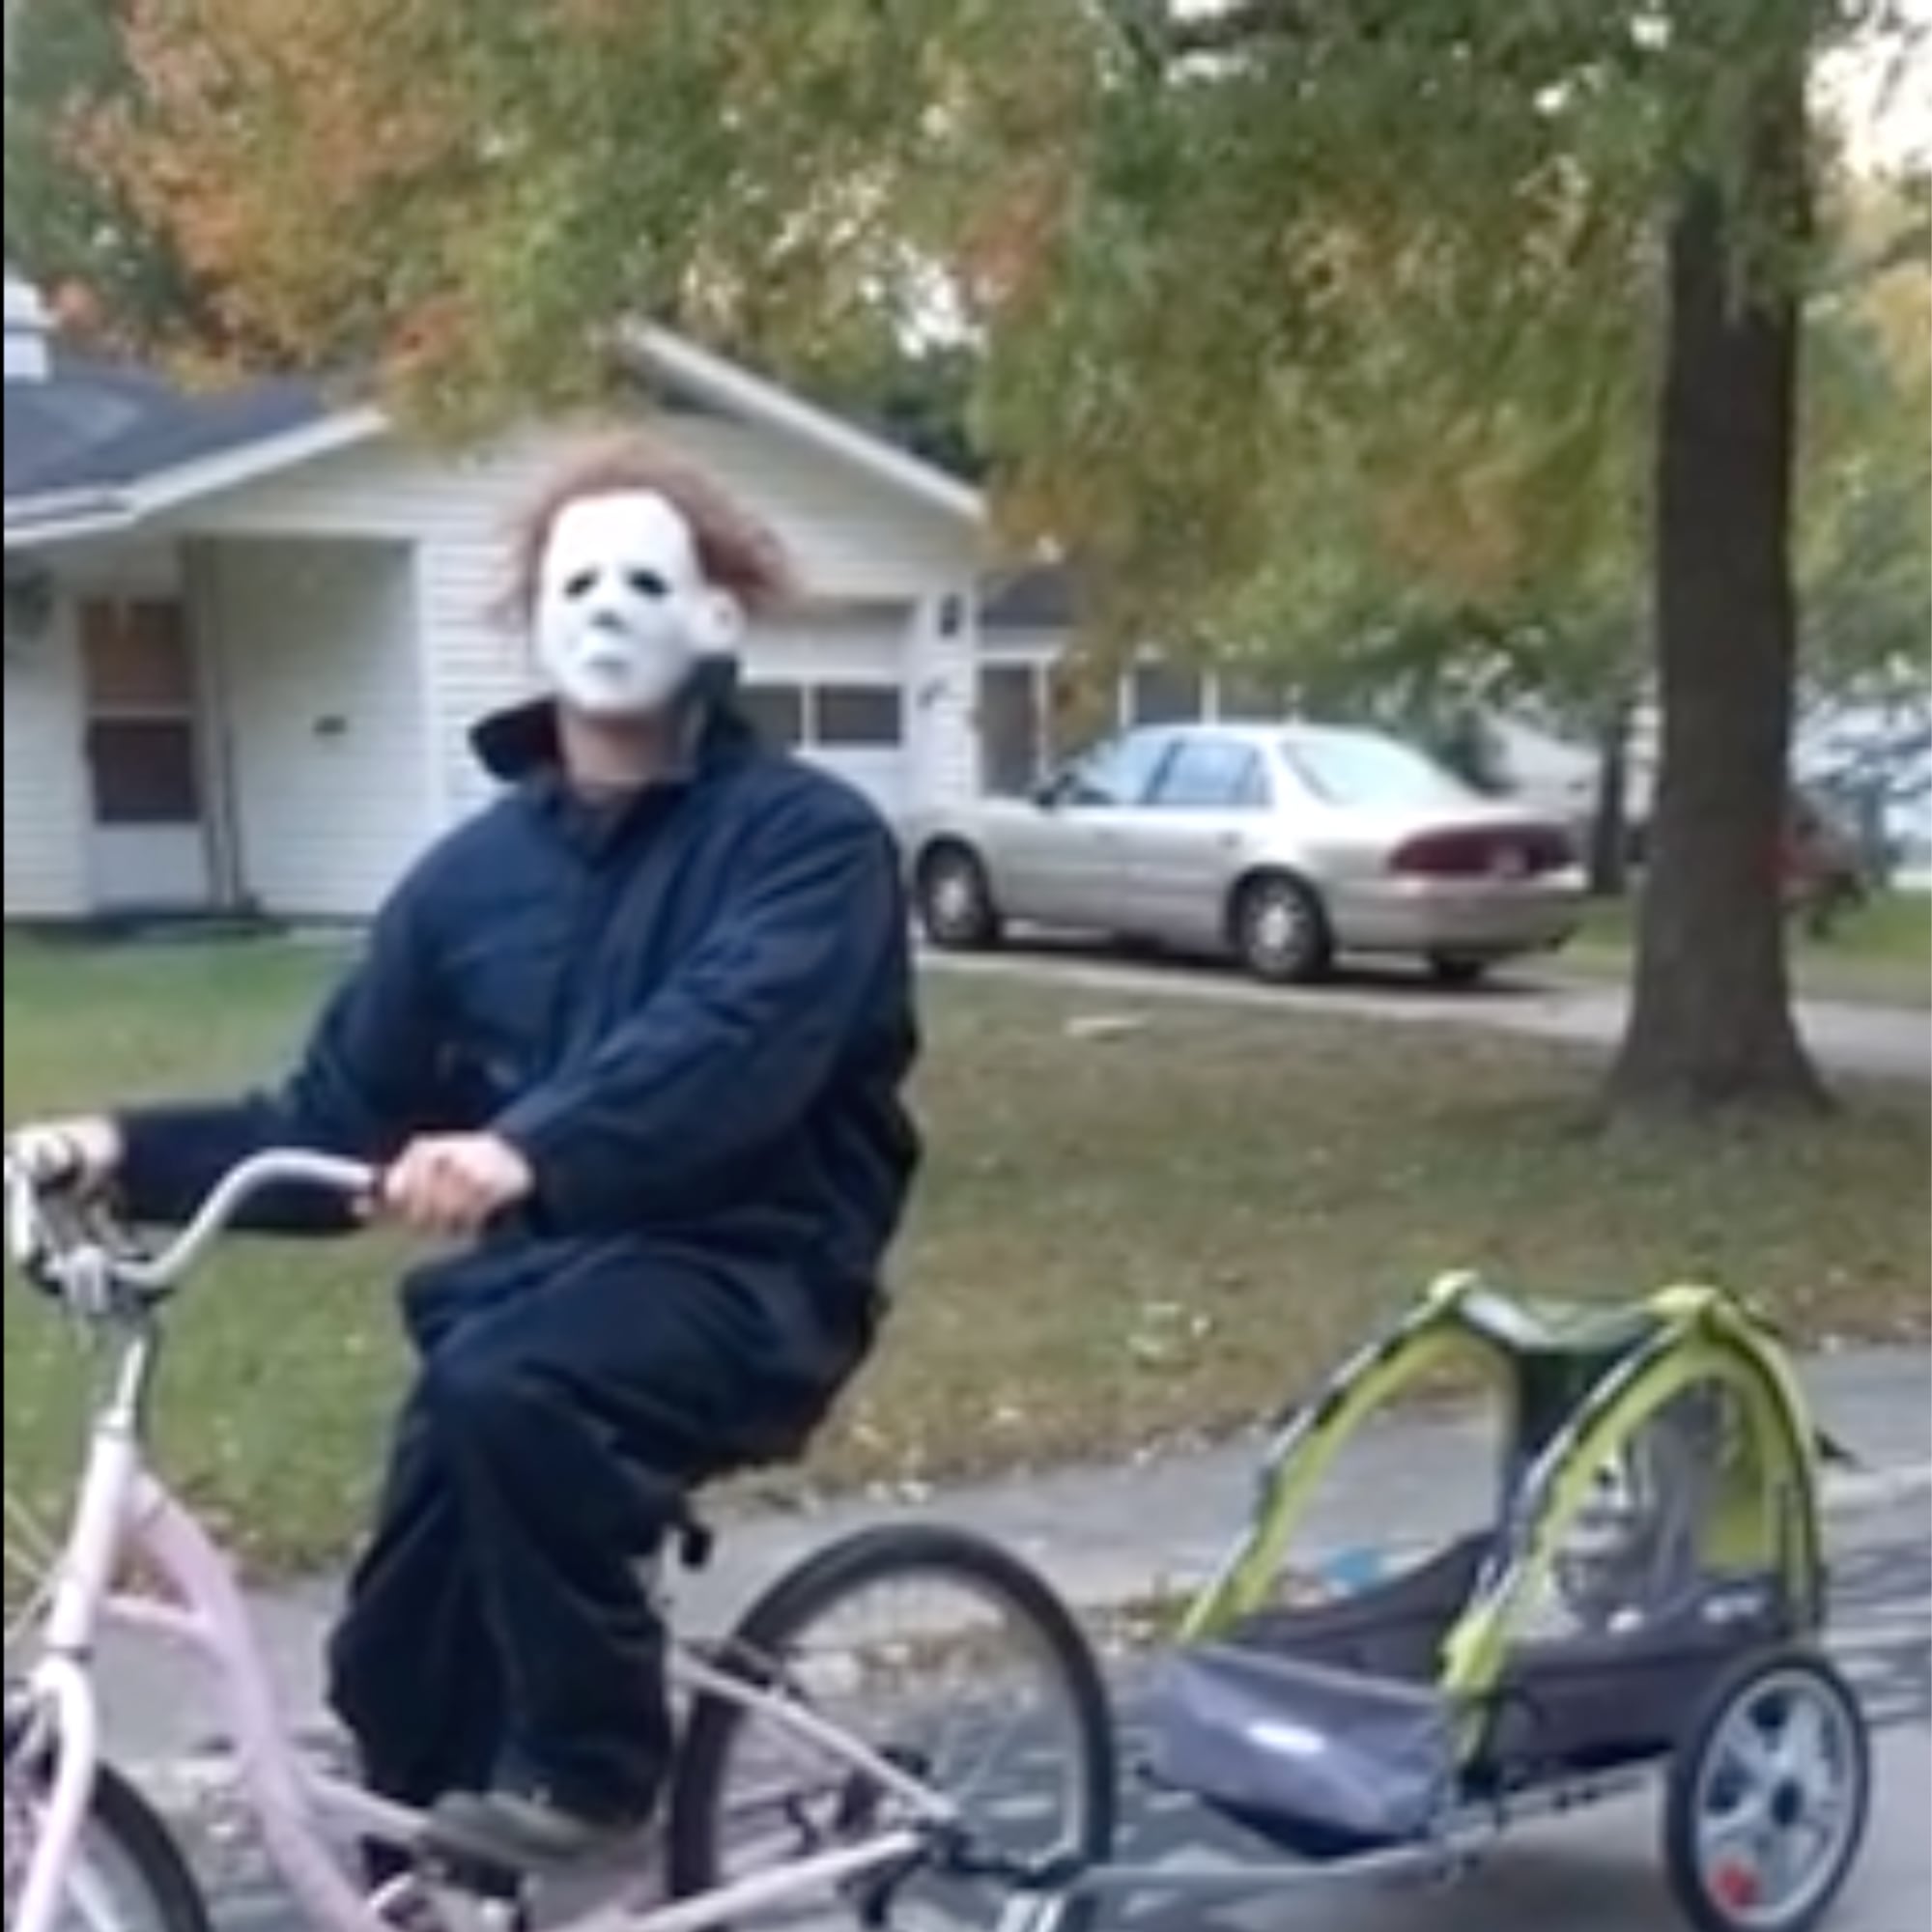 bicycle cart for baby